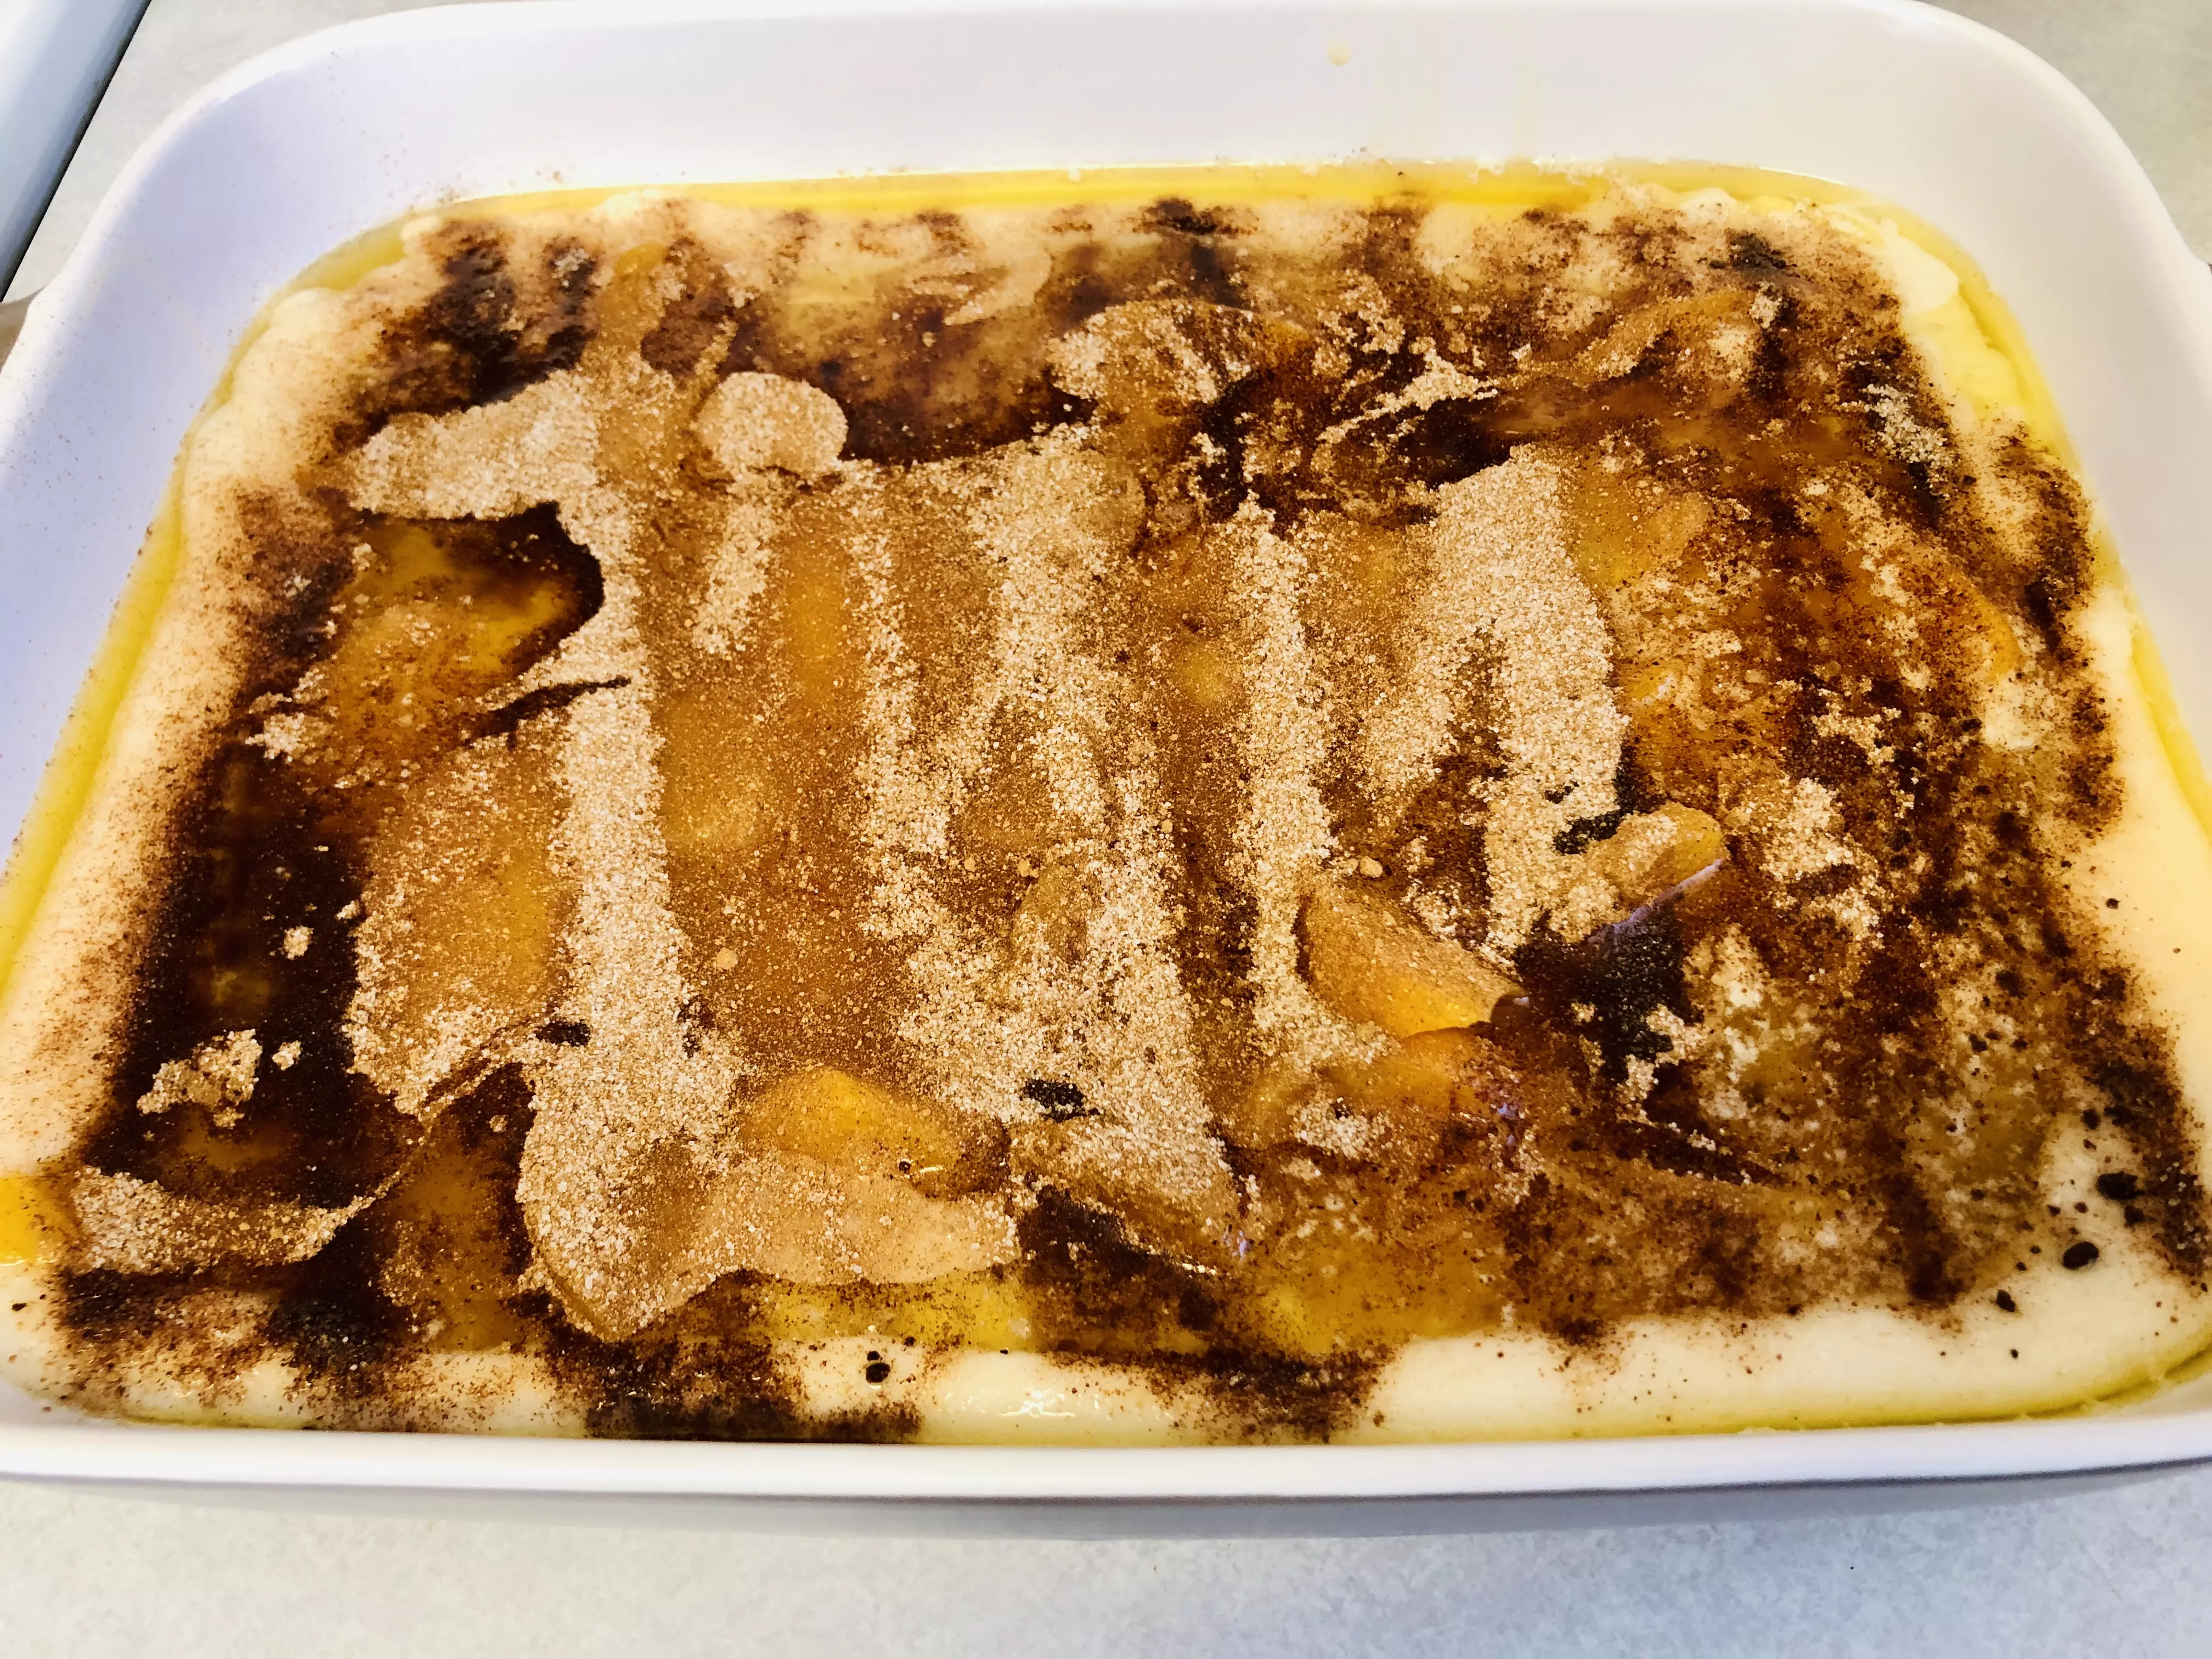 adding cinnamon and nutmeg topping to peach cobbler